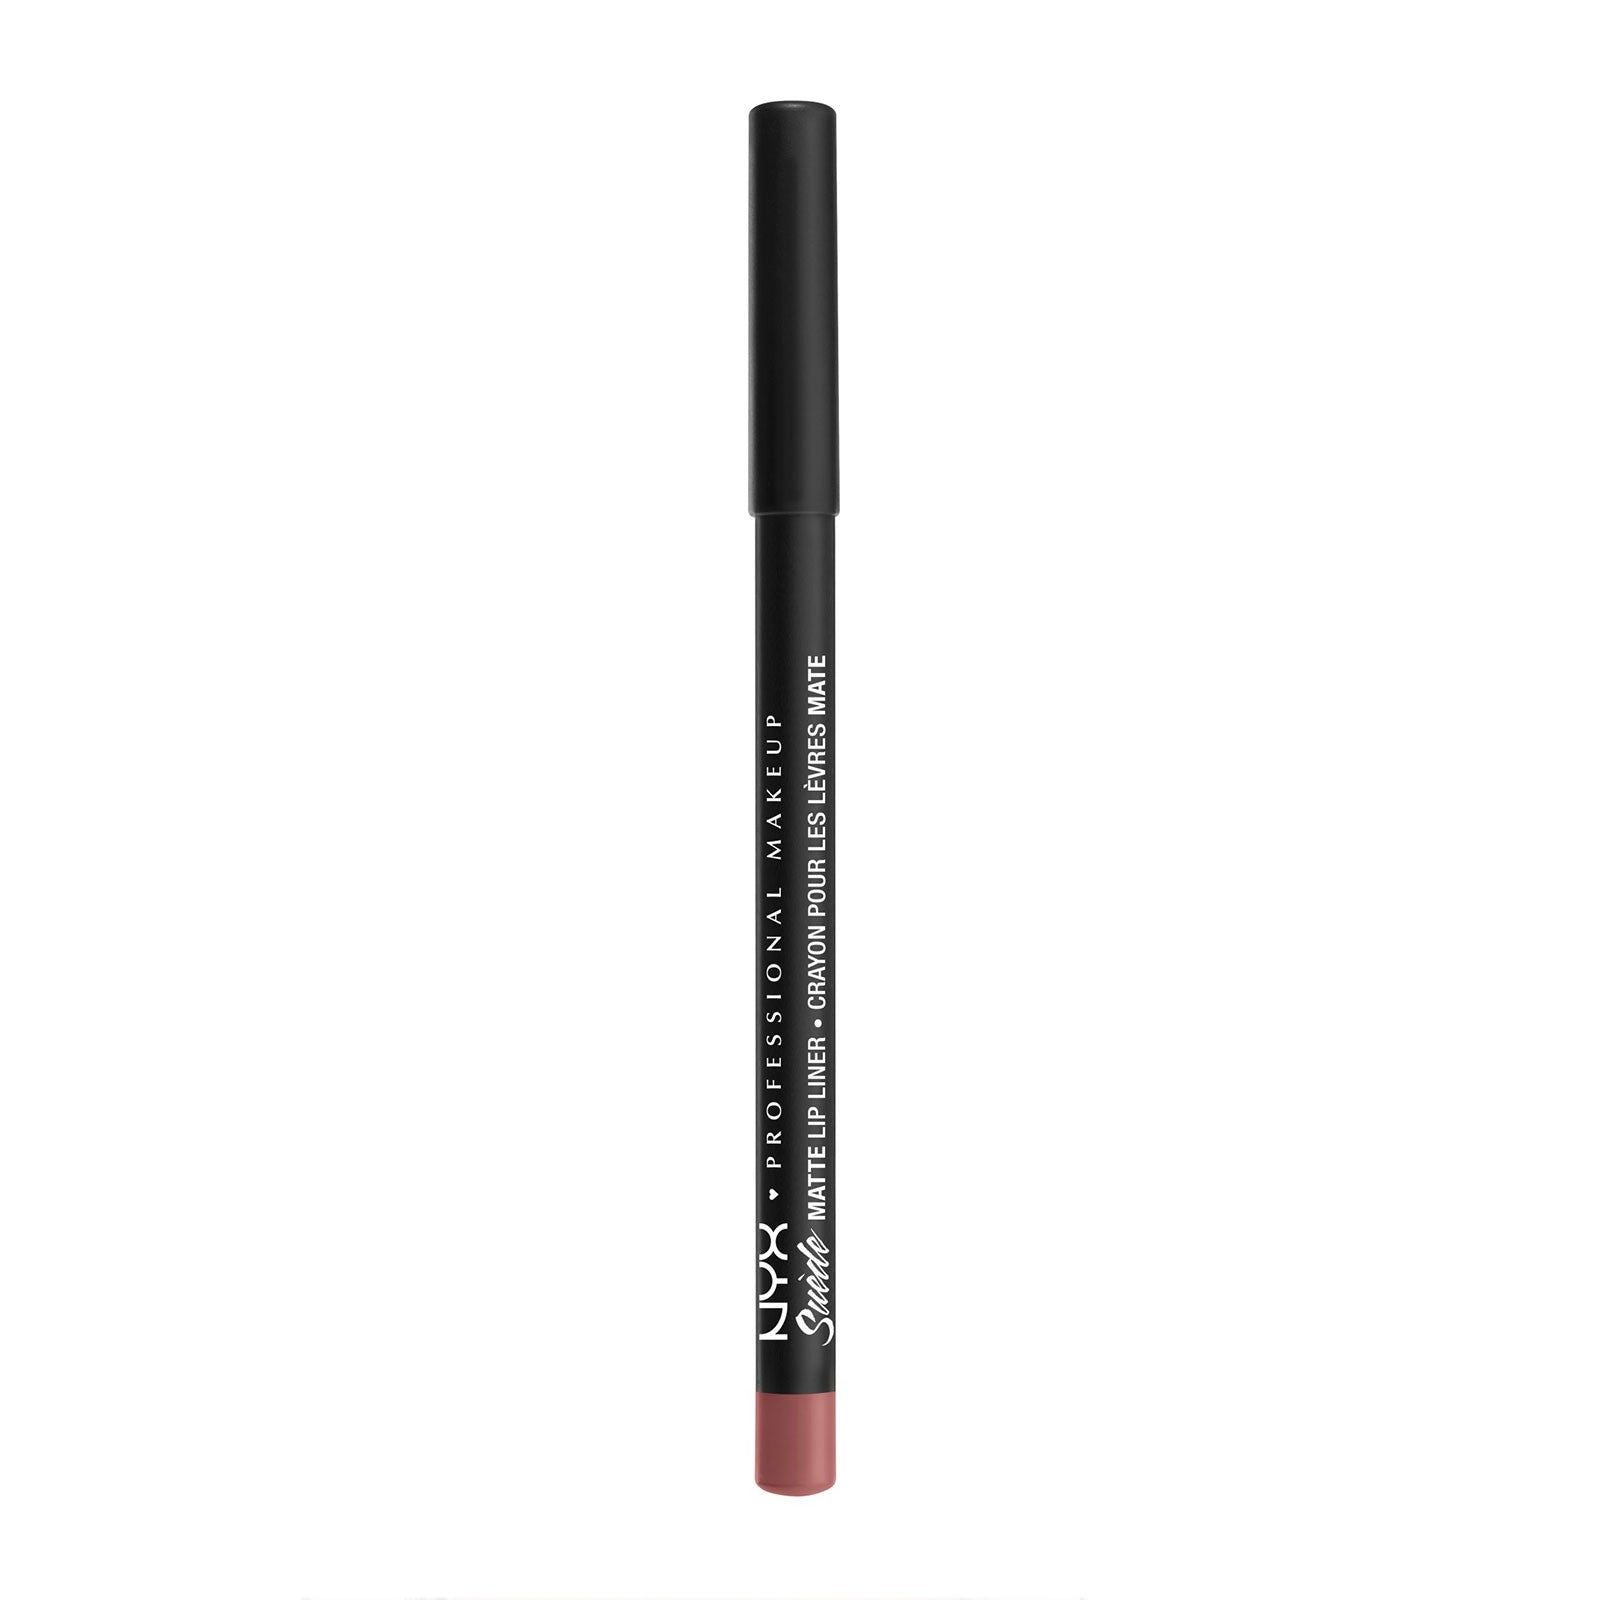 NYX Suede Matte Lip Liner Pencil SMLL53 Brunch Me 1g oh-so-pretty lip liners were literally made to match those powdery-matte lippies. Every velvety shade goes on smoothly and provides a perfect matte base.